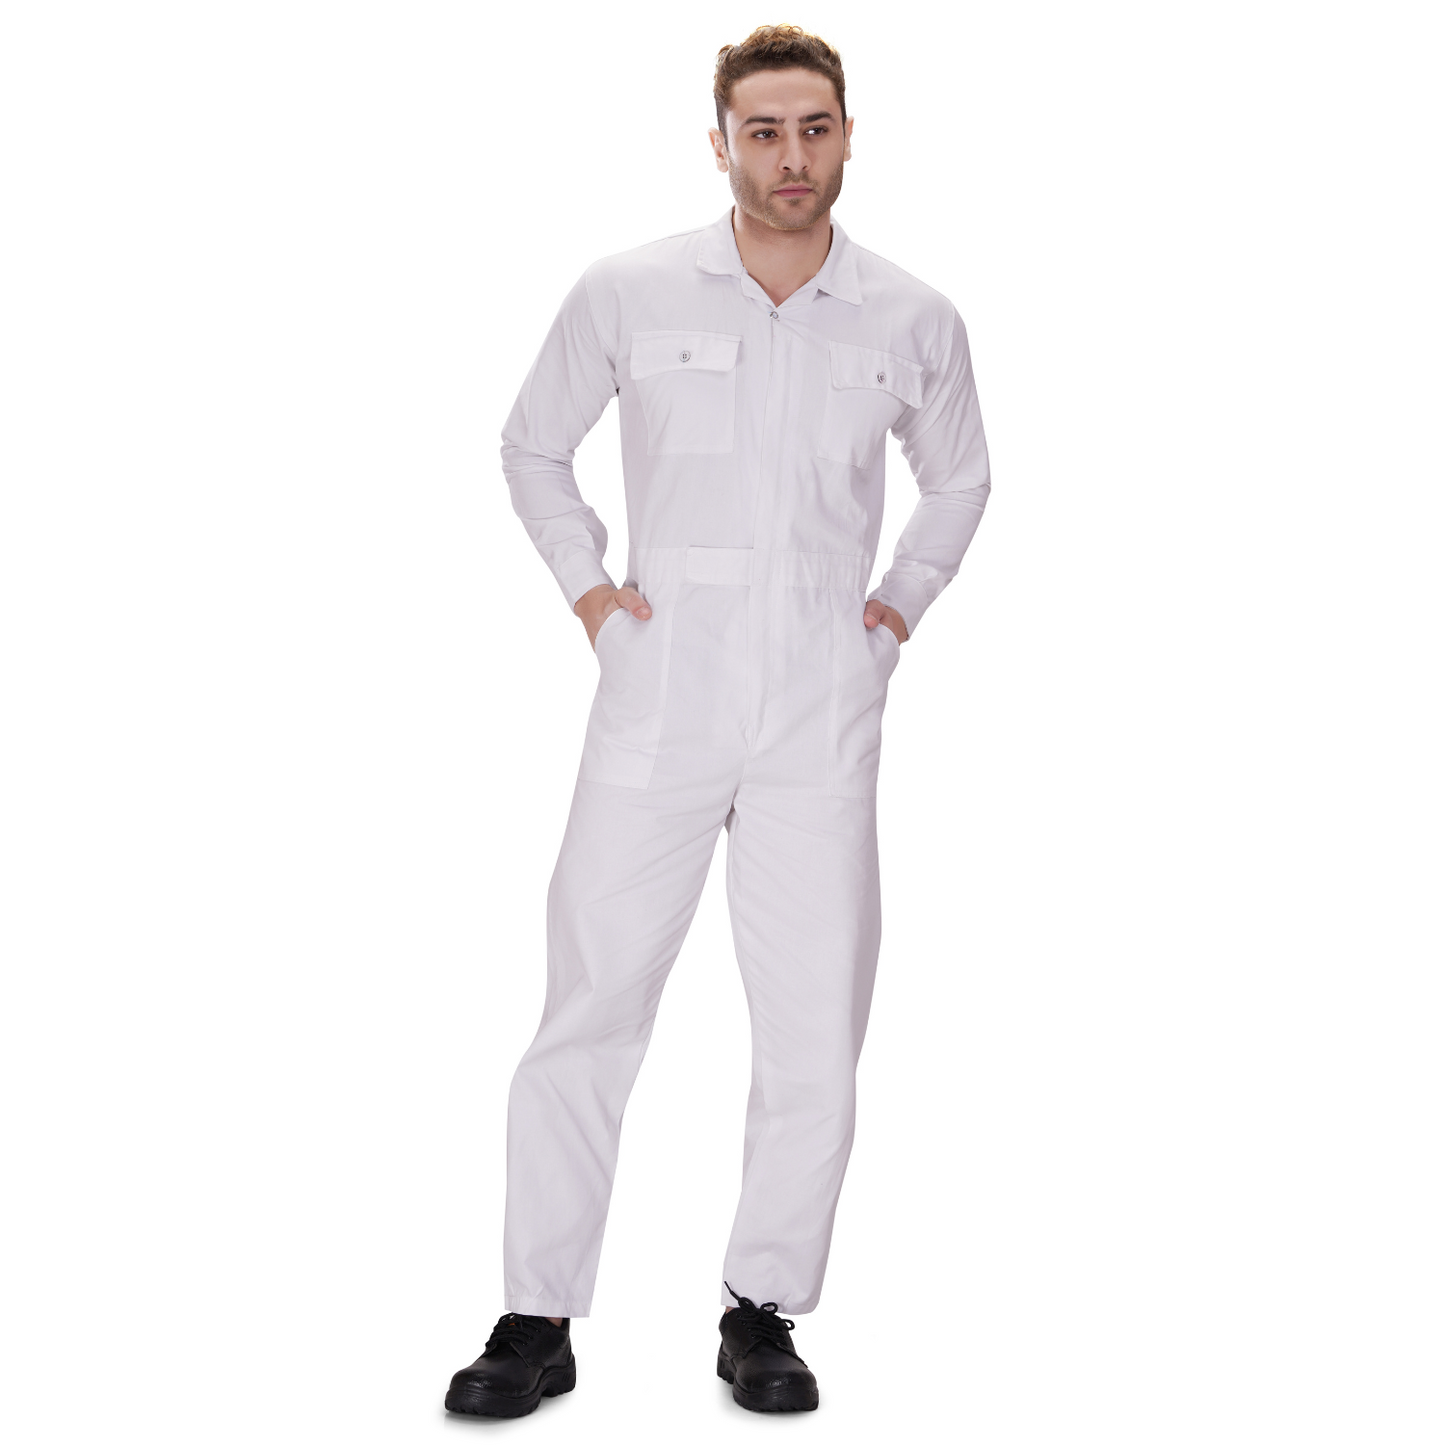 100% Cotton Hi-Visibility Industrial Coverall Boiler Suit - White